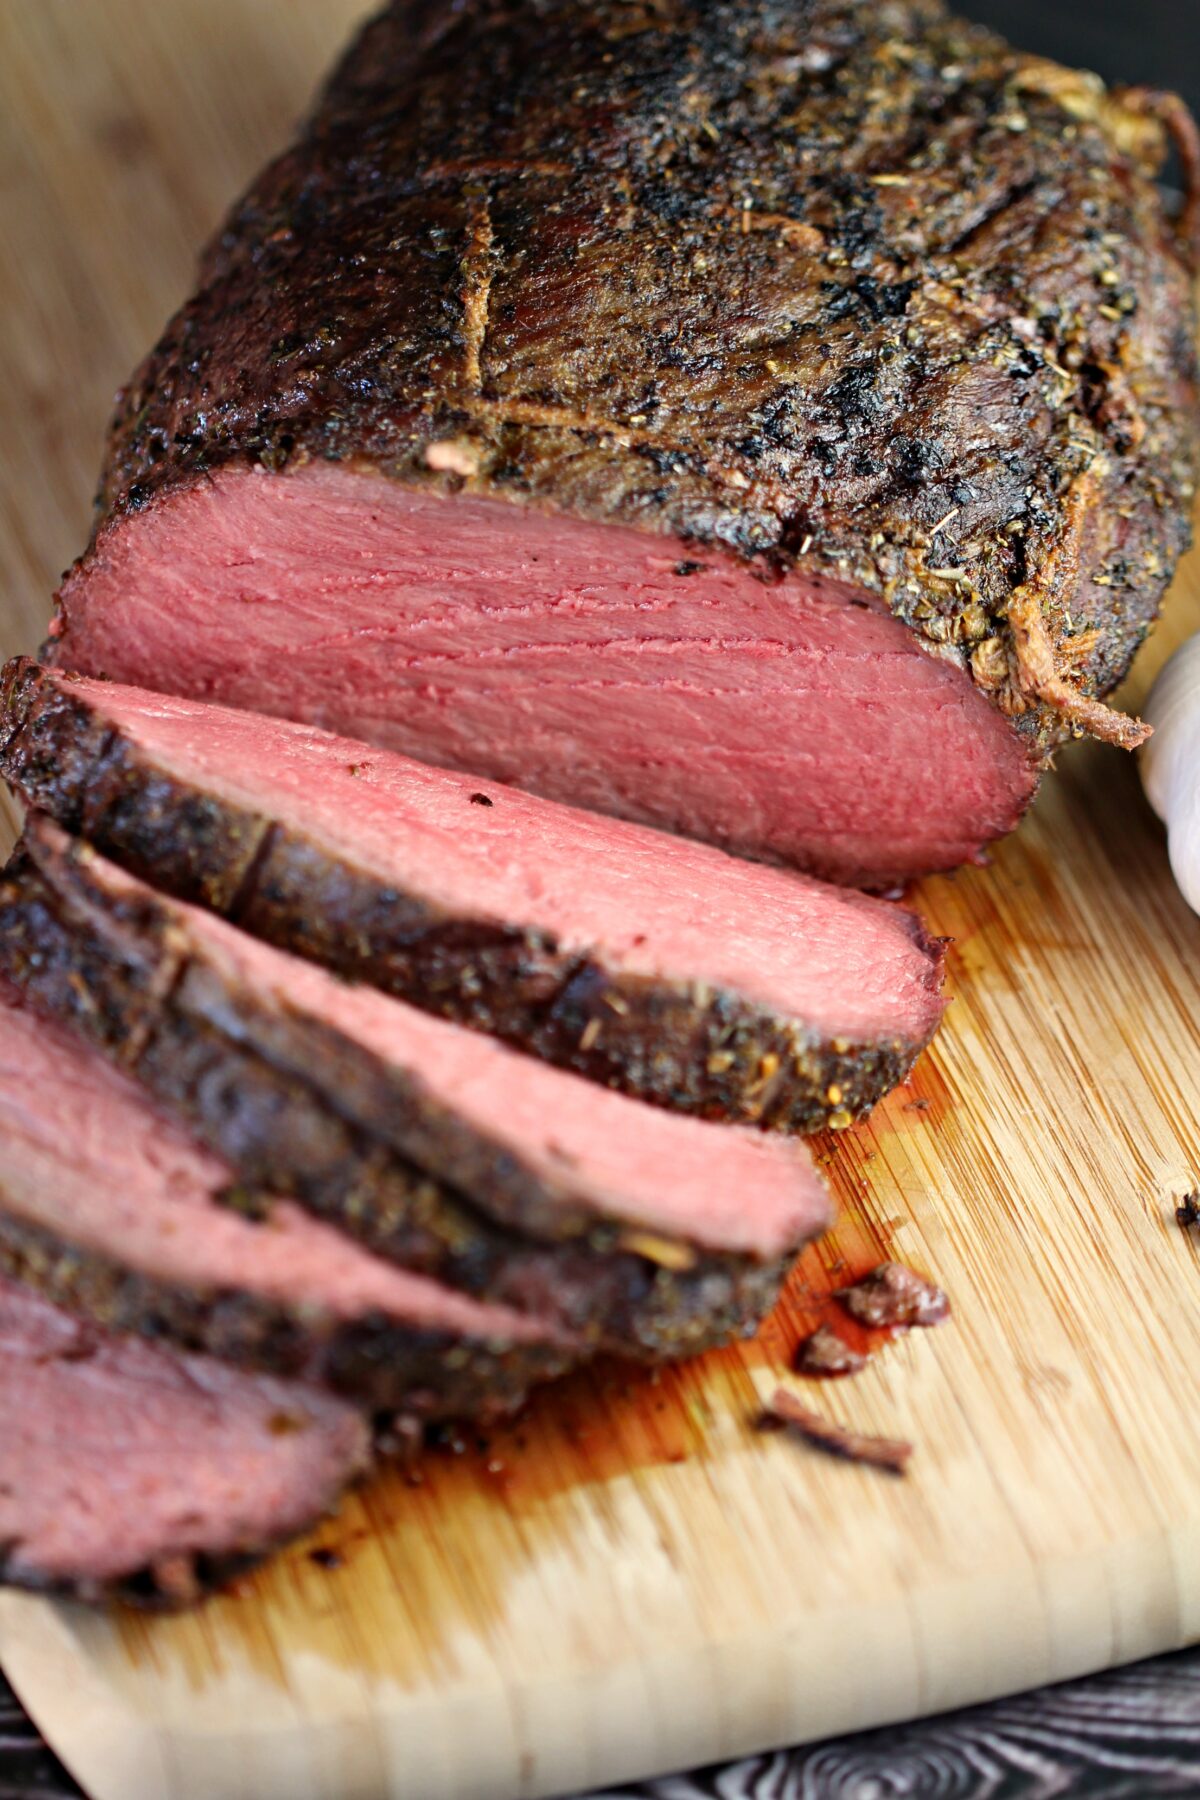 Cook a perfect sirloin tip roast with this recipe each and every time. Juicy, full of flavour and cooked to perfection, you can't go wrong!